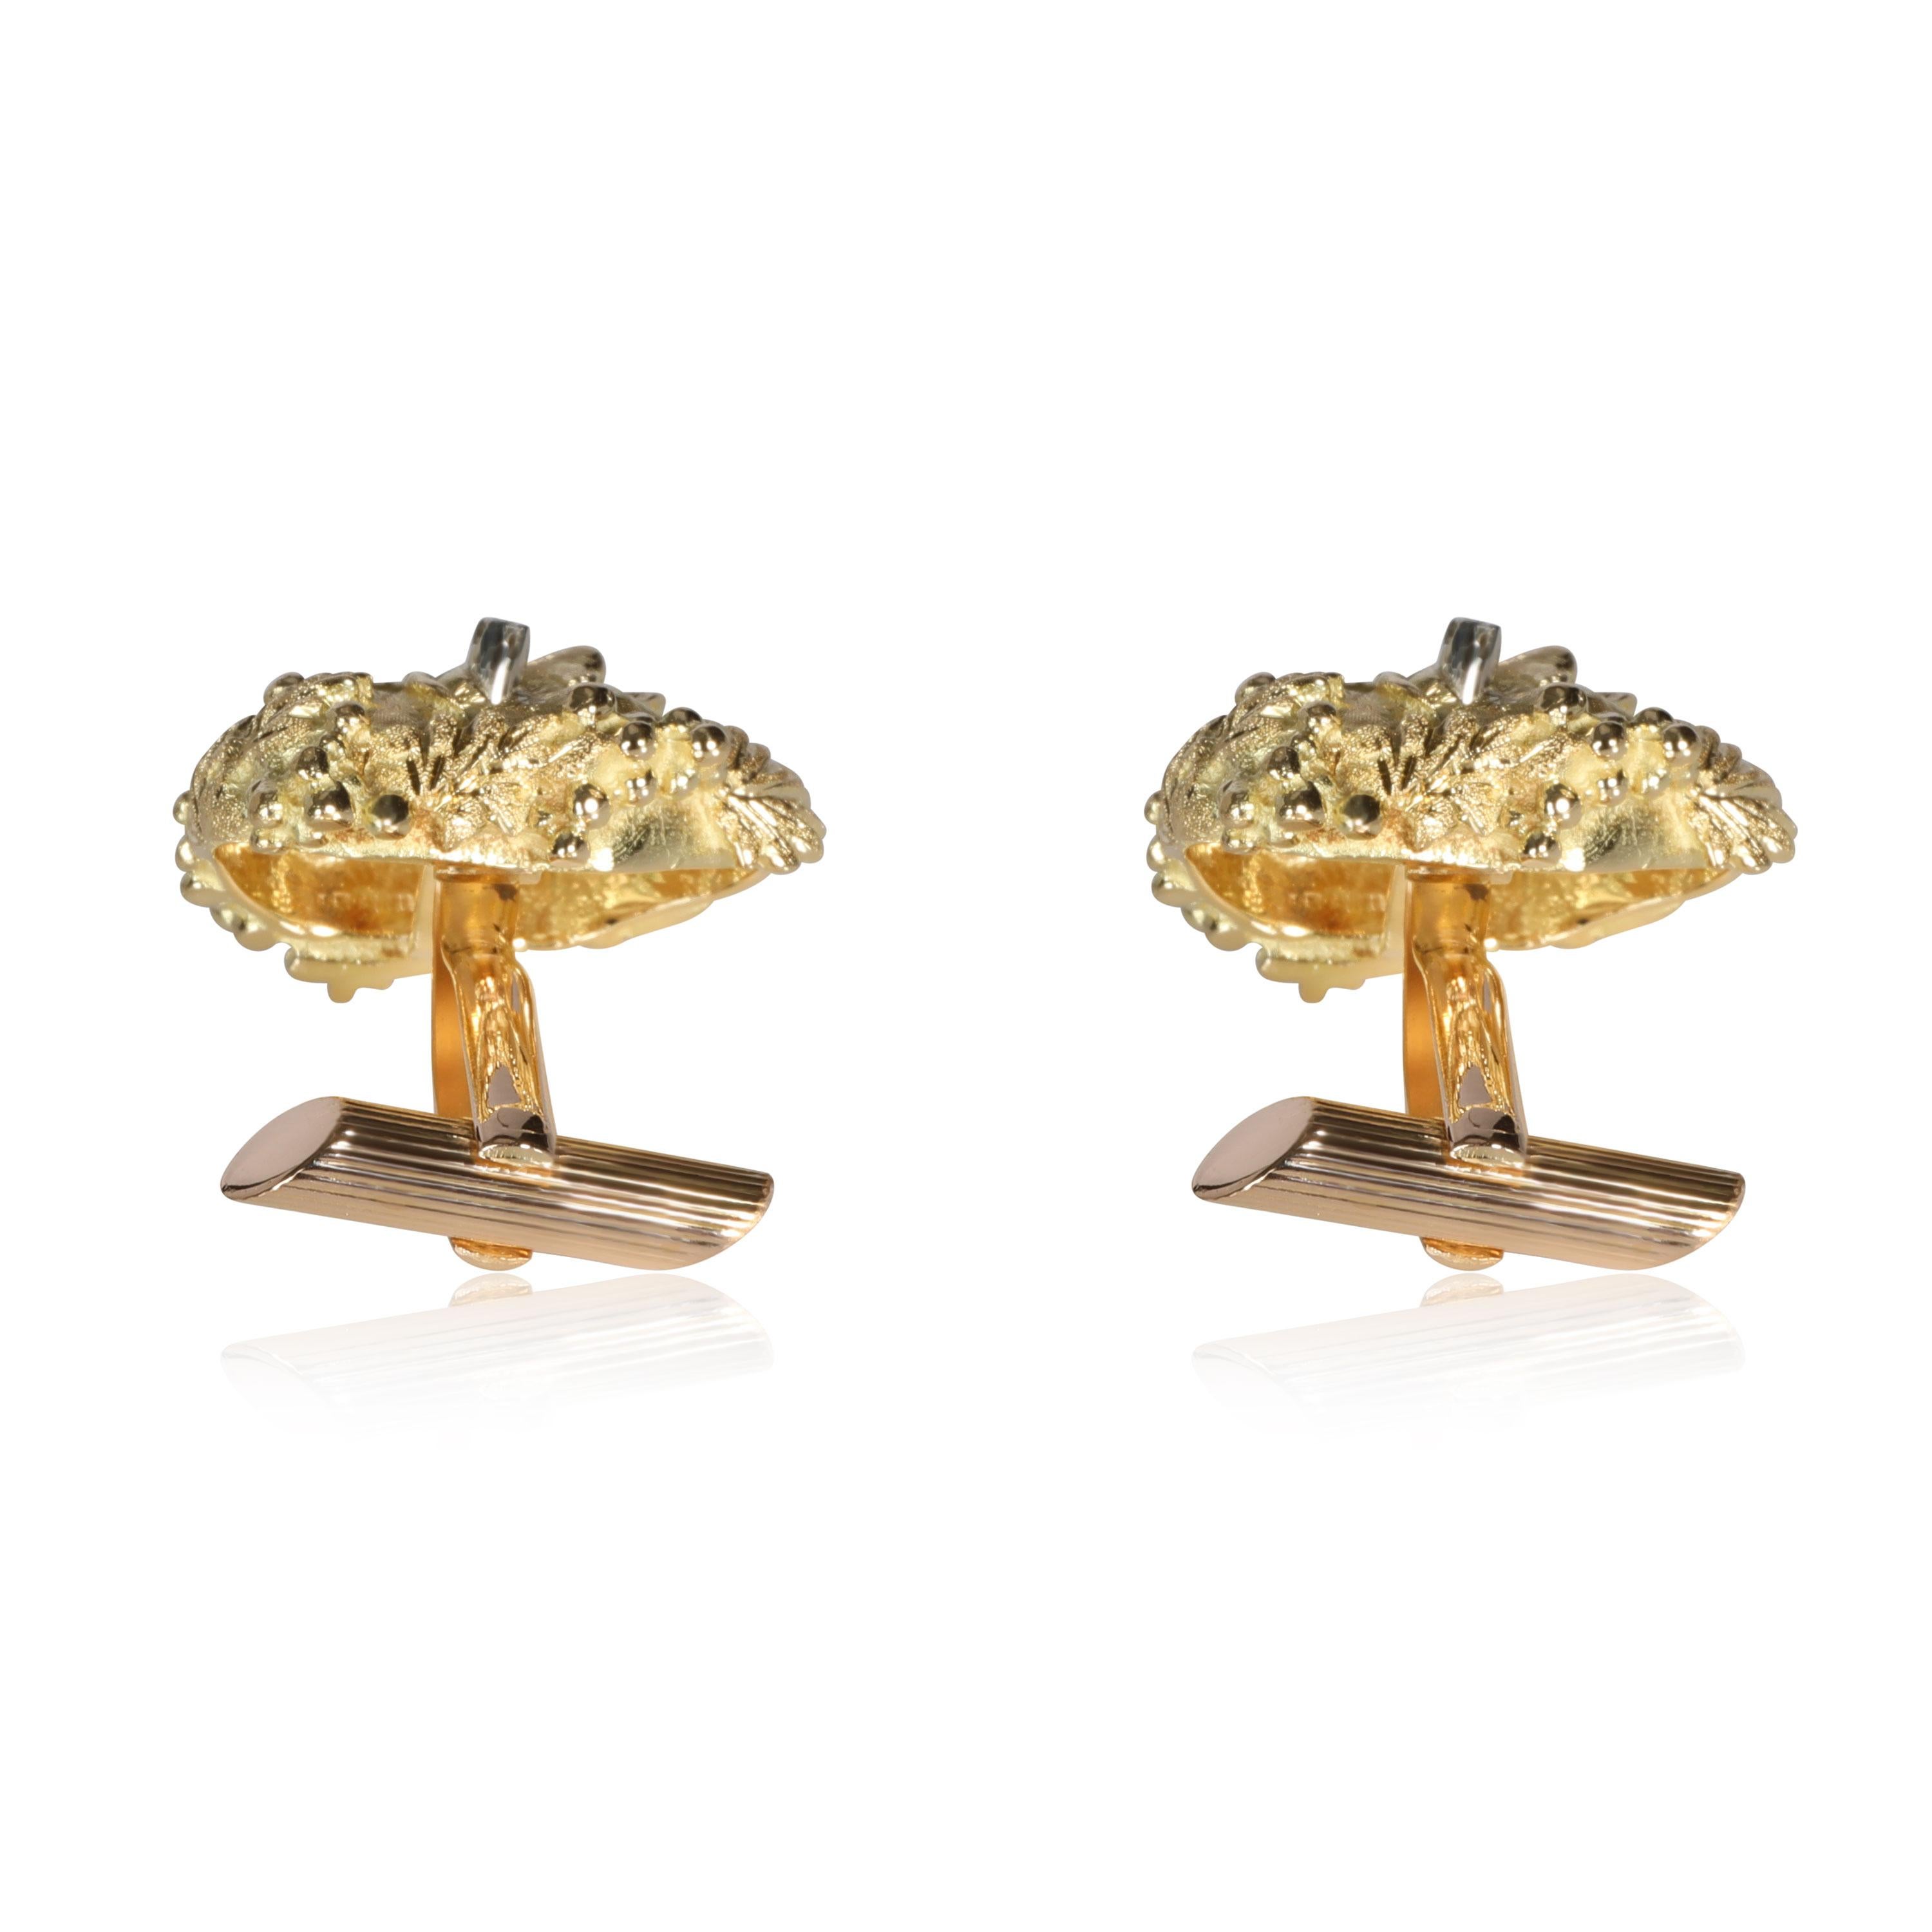 Bacchus Diamond Cufflinks in 18K Yellow Gold 0.04 CTW

PRIMARY DETAILS
SKU: 107666
Listing Title: Bacchus Diamond Cufflinks in 18K Yellow Gold 0.04 CTW
Condition Description: In excellent condition and recently polished.
Brand: